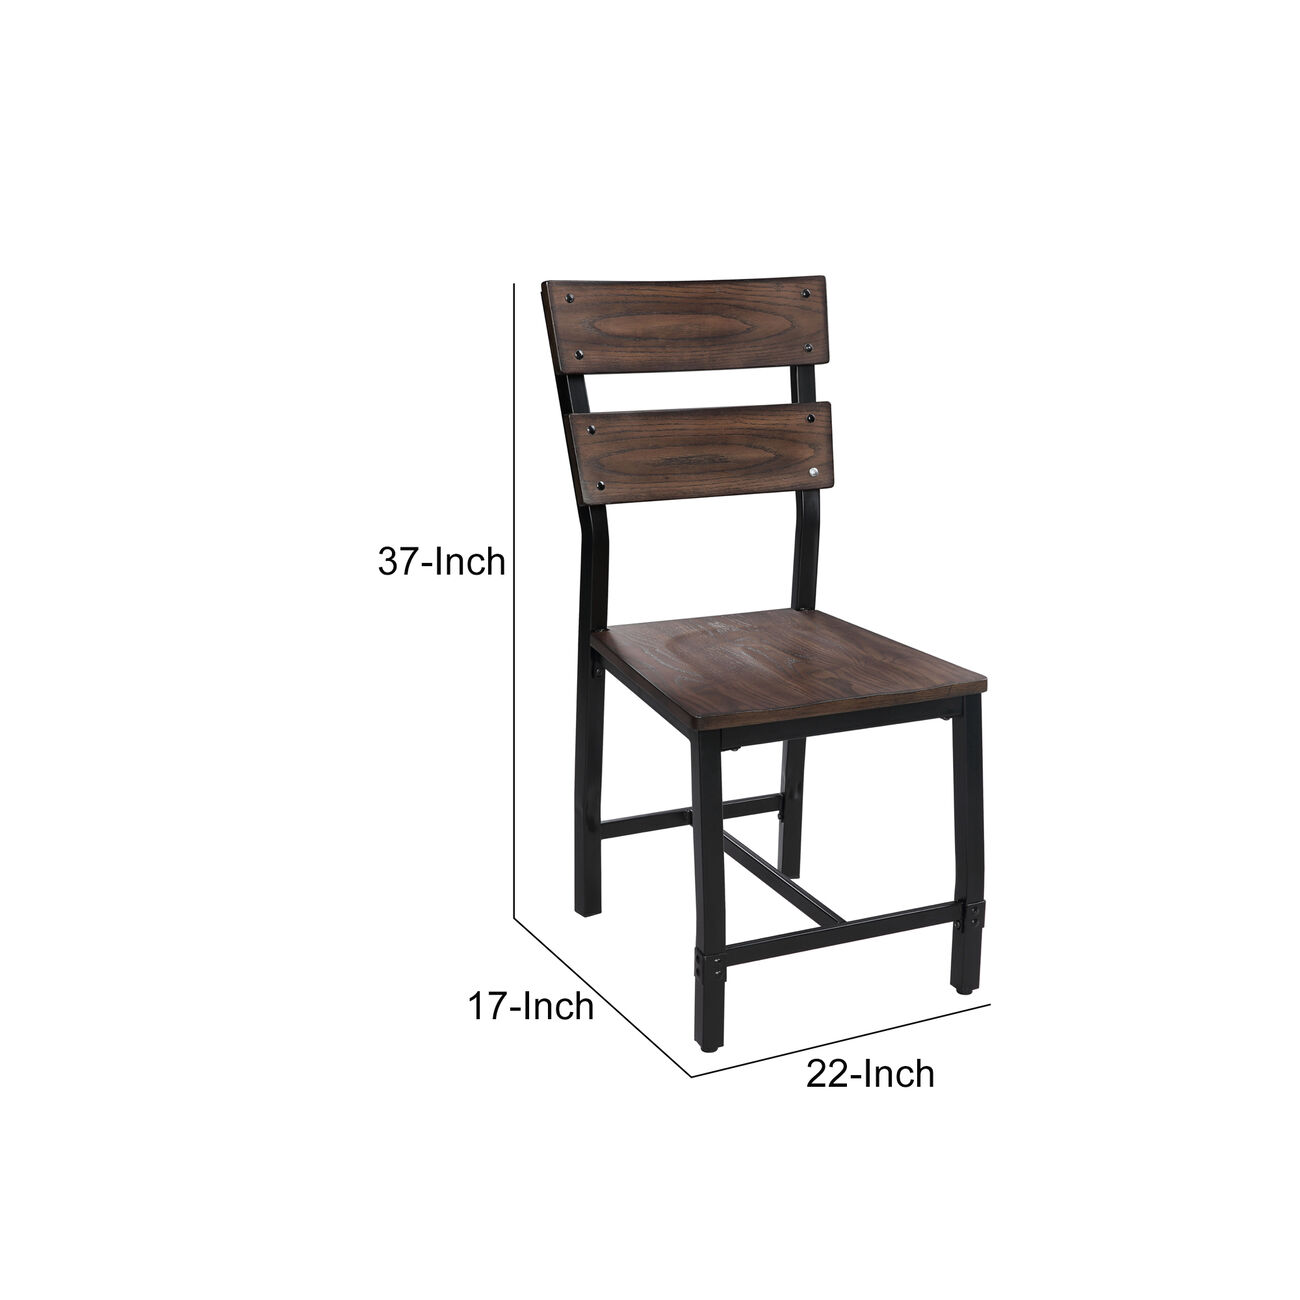 Wood and Metal Dining Side Chairs, Set of 2, Brown and Black